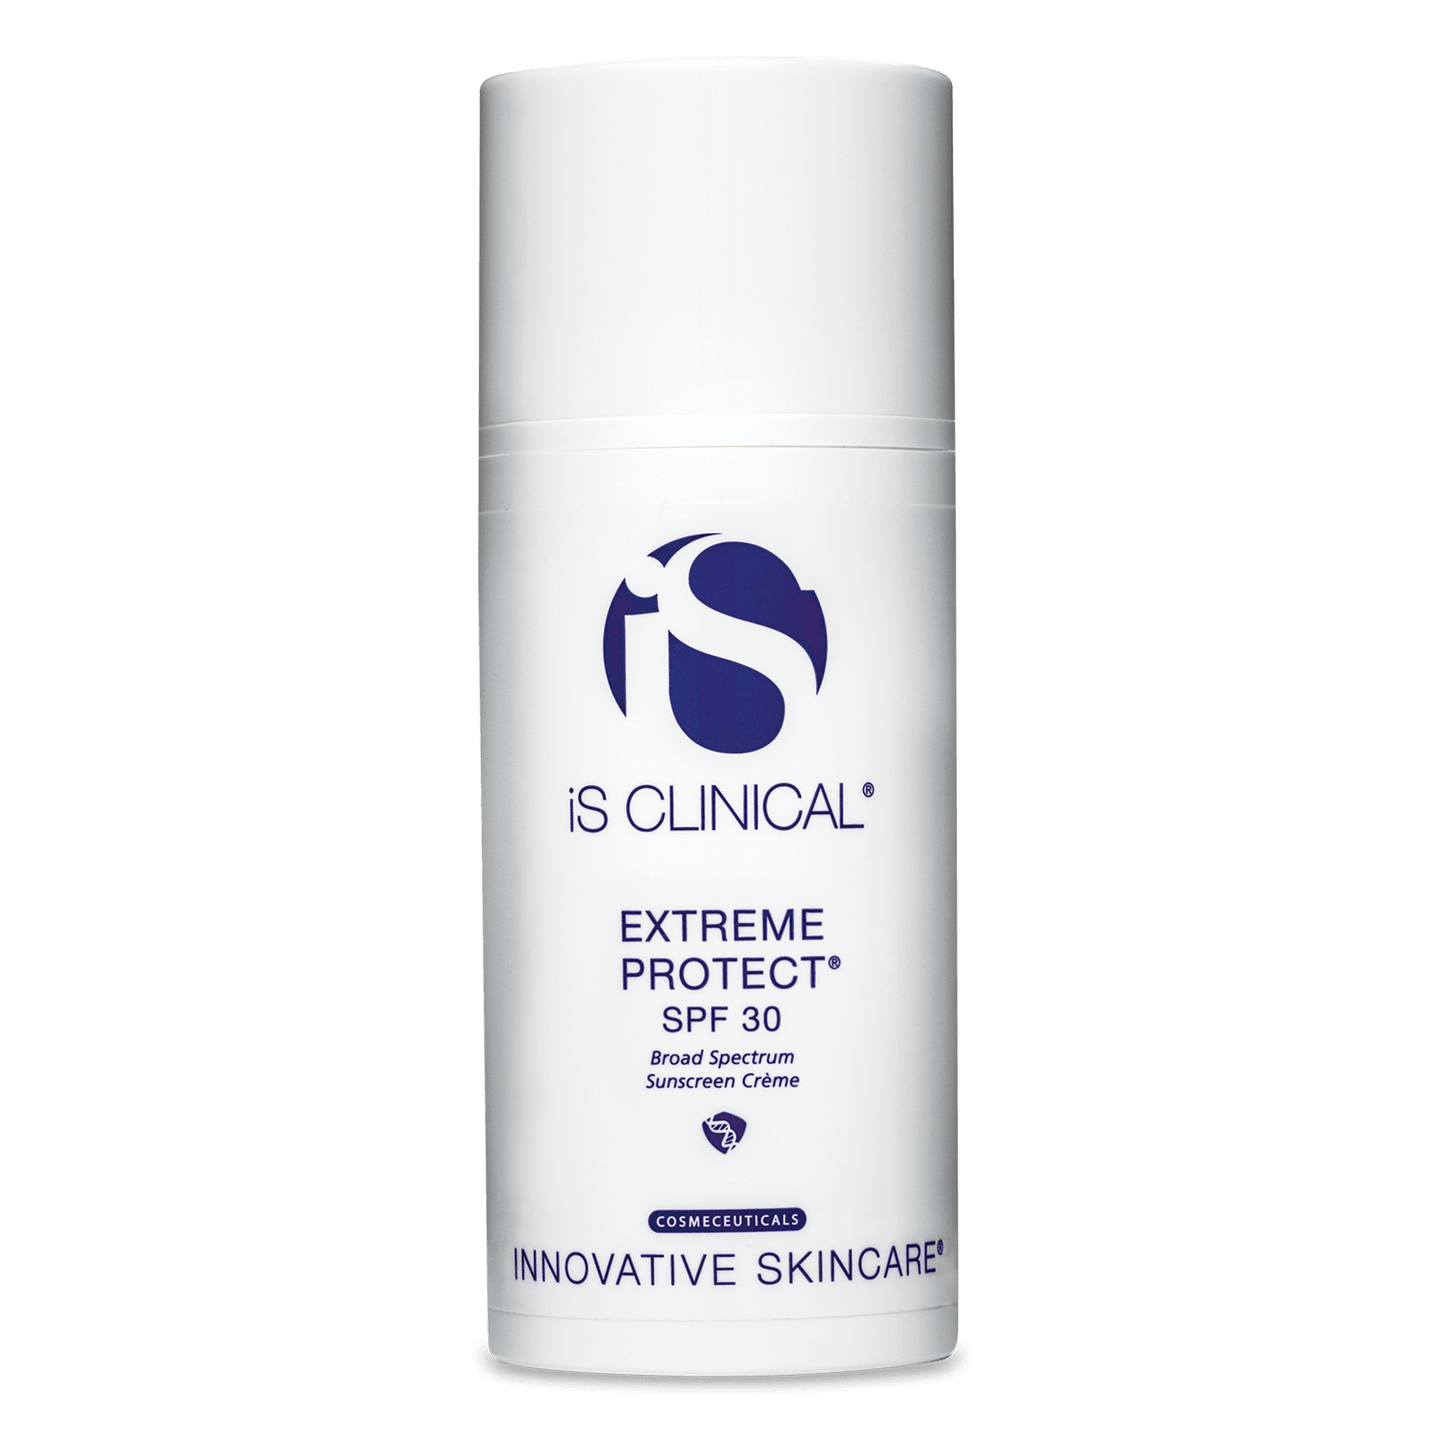 Extreme Protect SPF 30 by iS CLINICAL